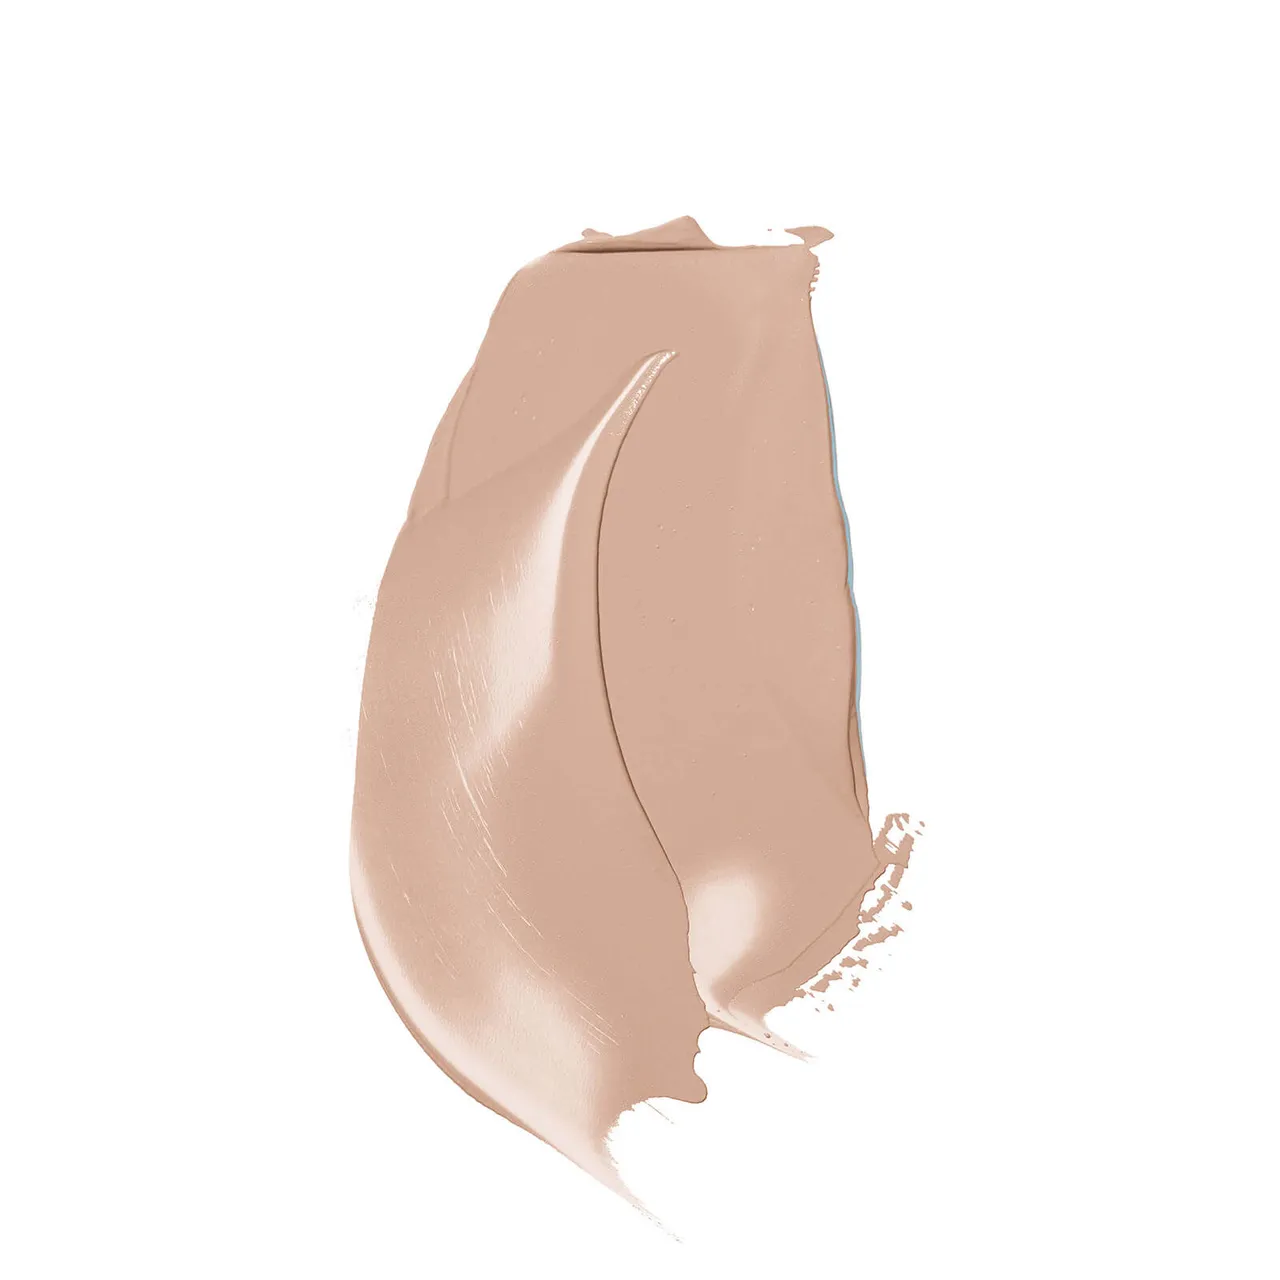 Revlon Colorstay Full Cover Foundation 31g (Various Shades) - Nude